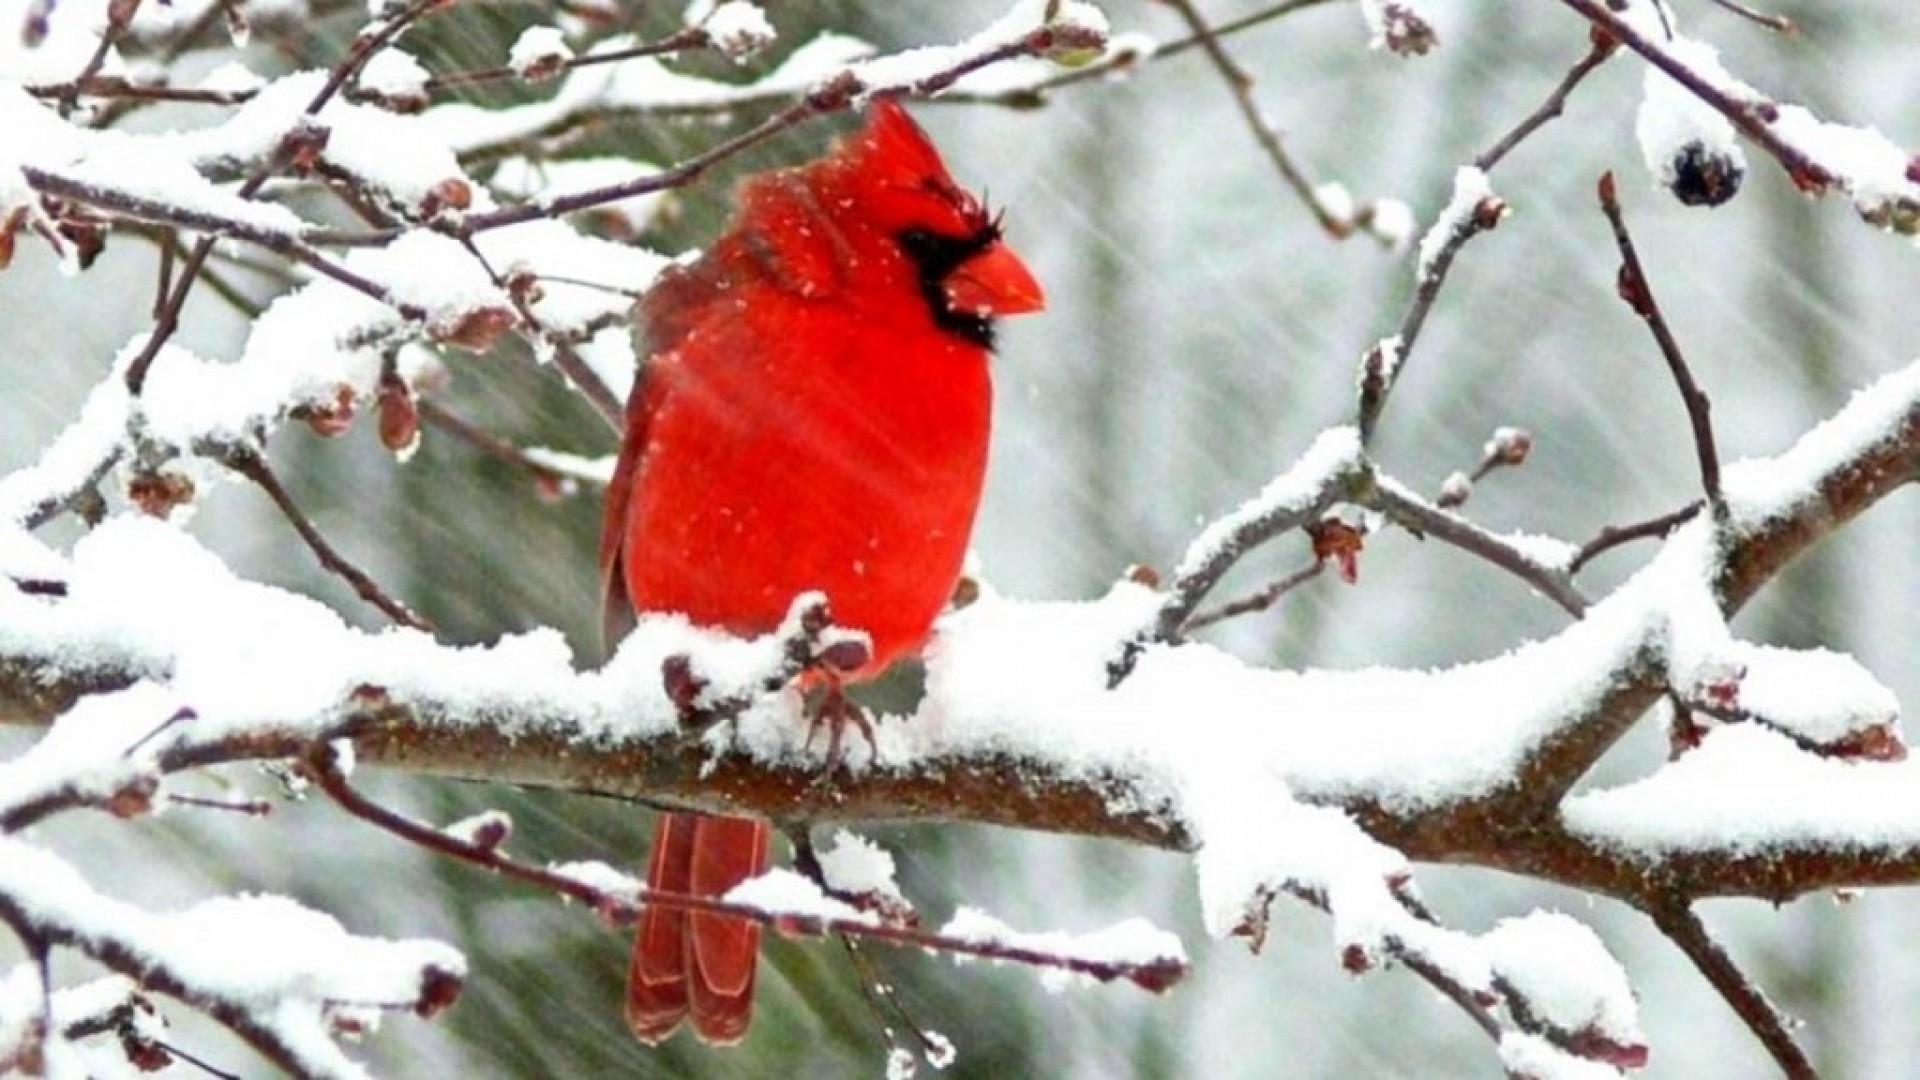 Davis: Winter cardinals don their brightest red feathers